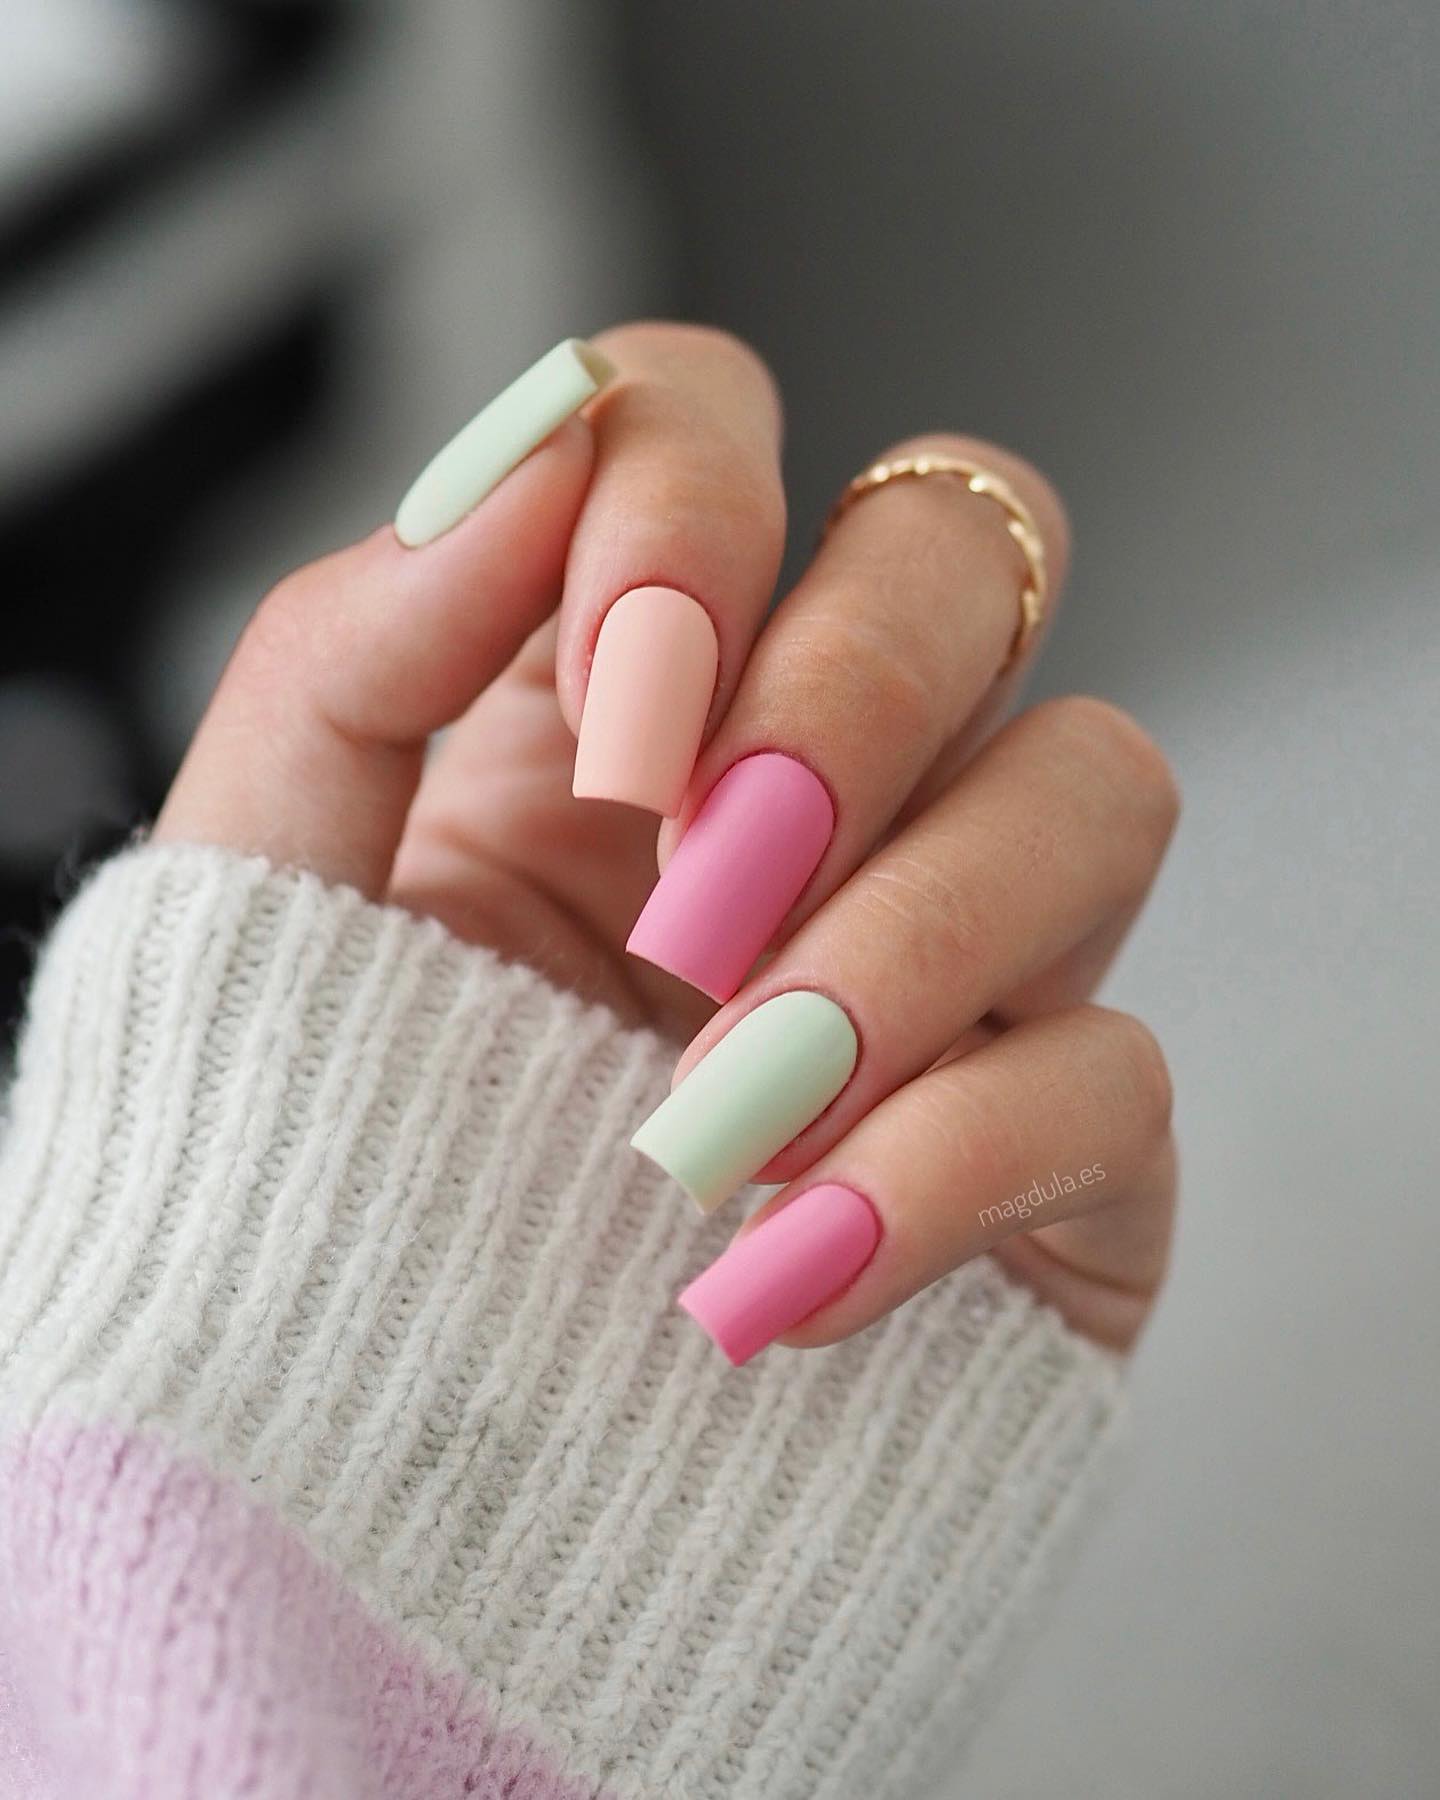 Pastel colored Nail polishes by Essie | Pretty nail art designs, Nail polish  art, Nail polish